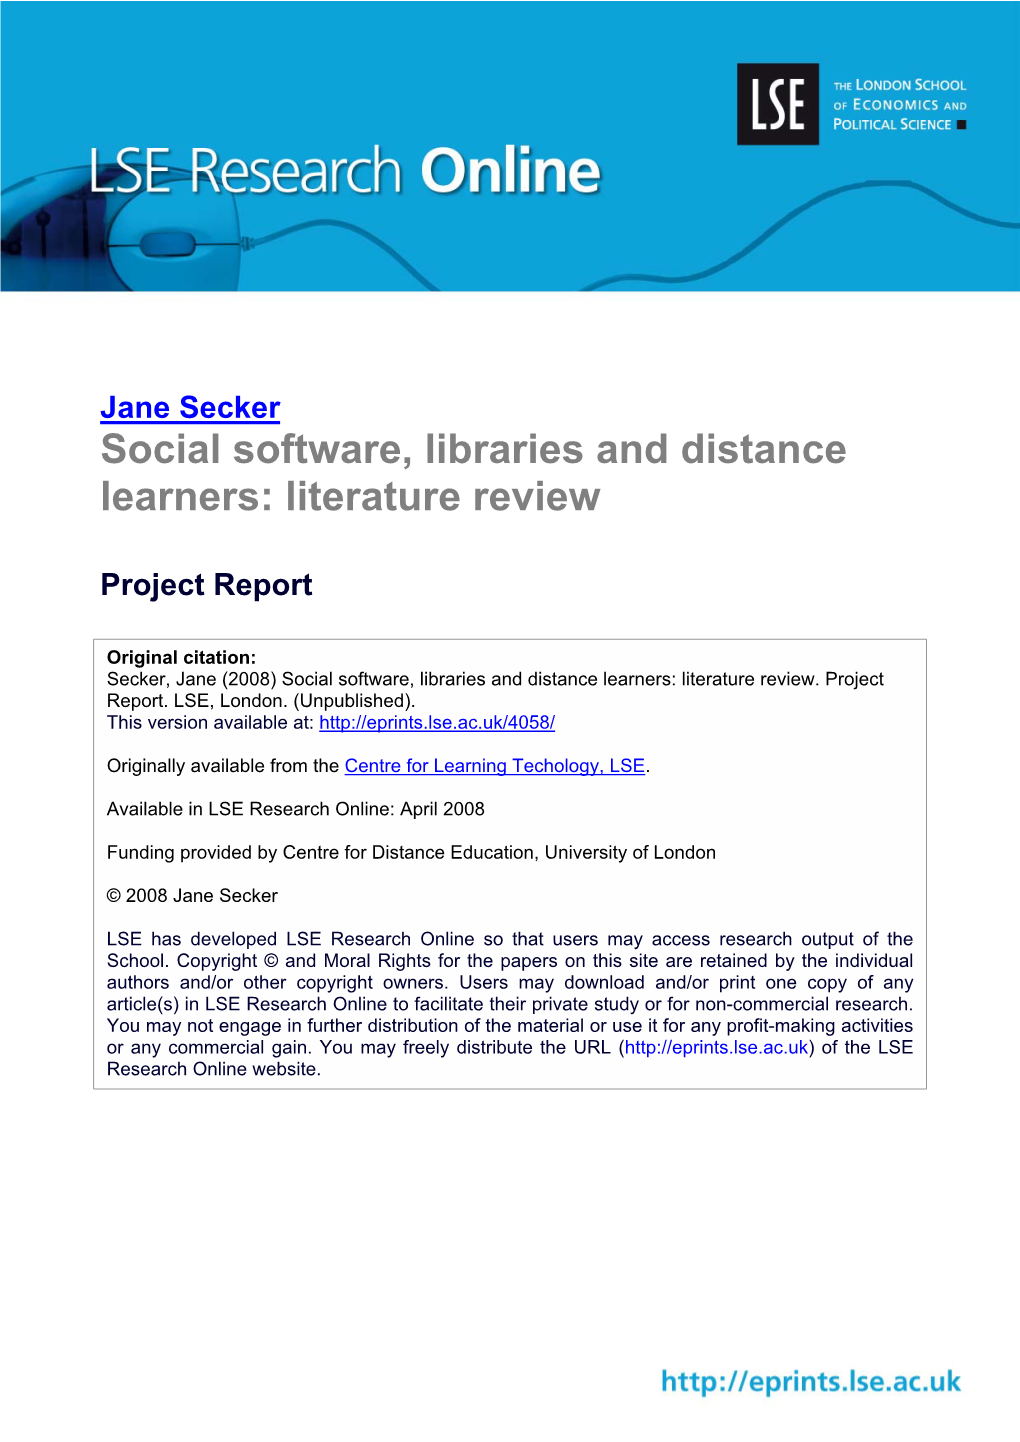 Social Software, Libraries and Distance Learners: Literature Review